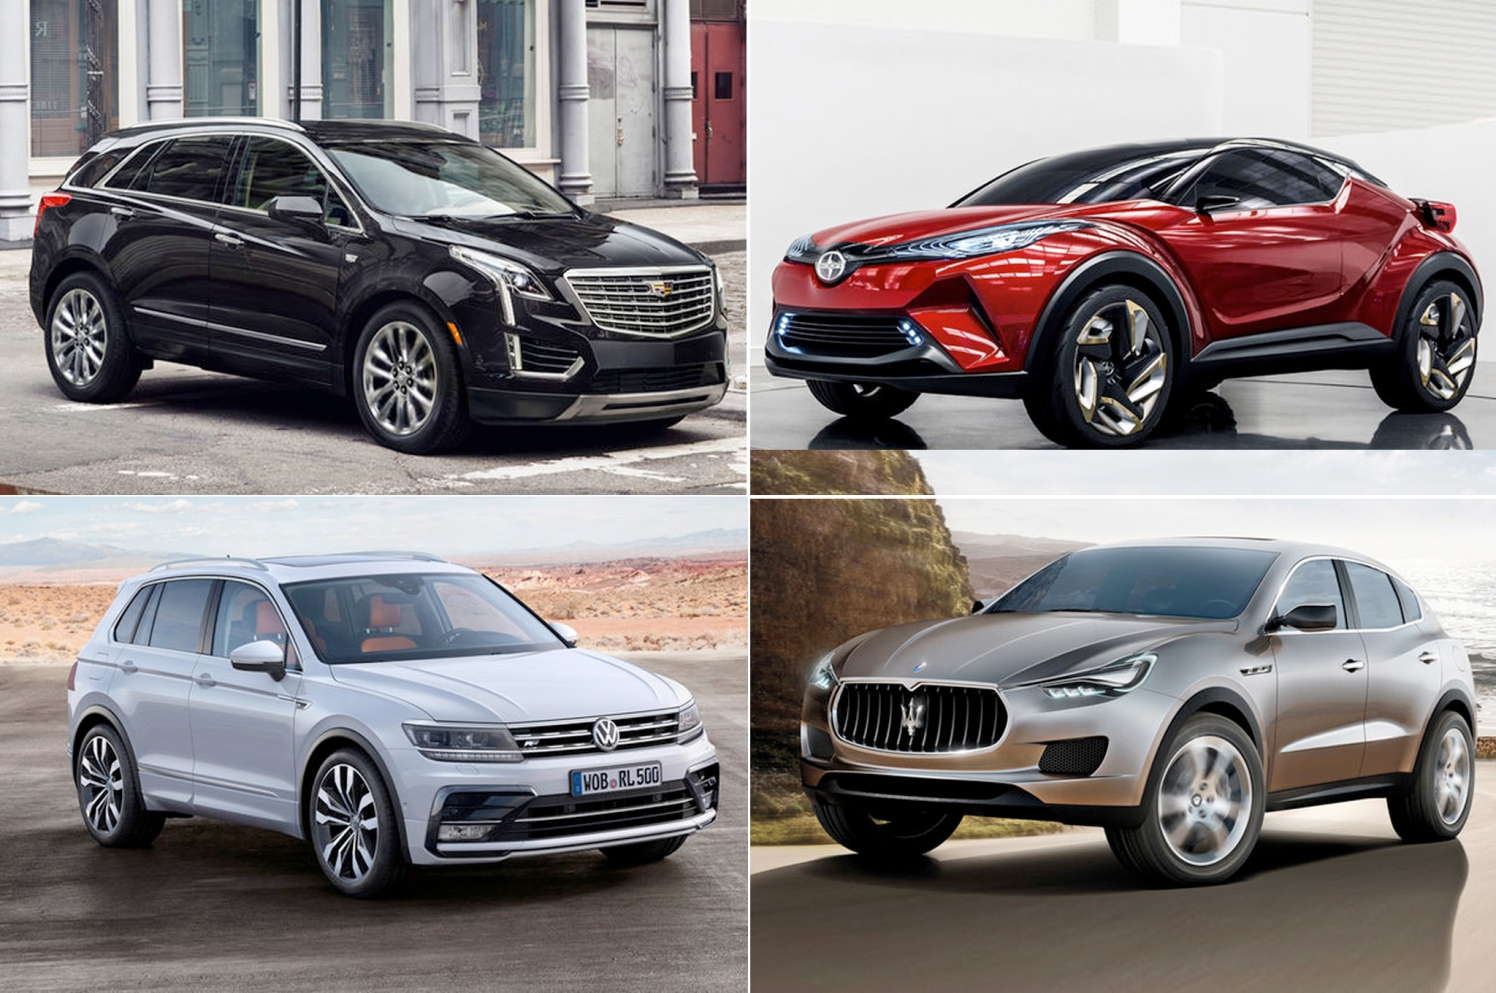 20-Crossovers-SUVs-to-Look-Forward-to-in-2016-and-Beyond.jpg